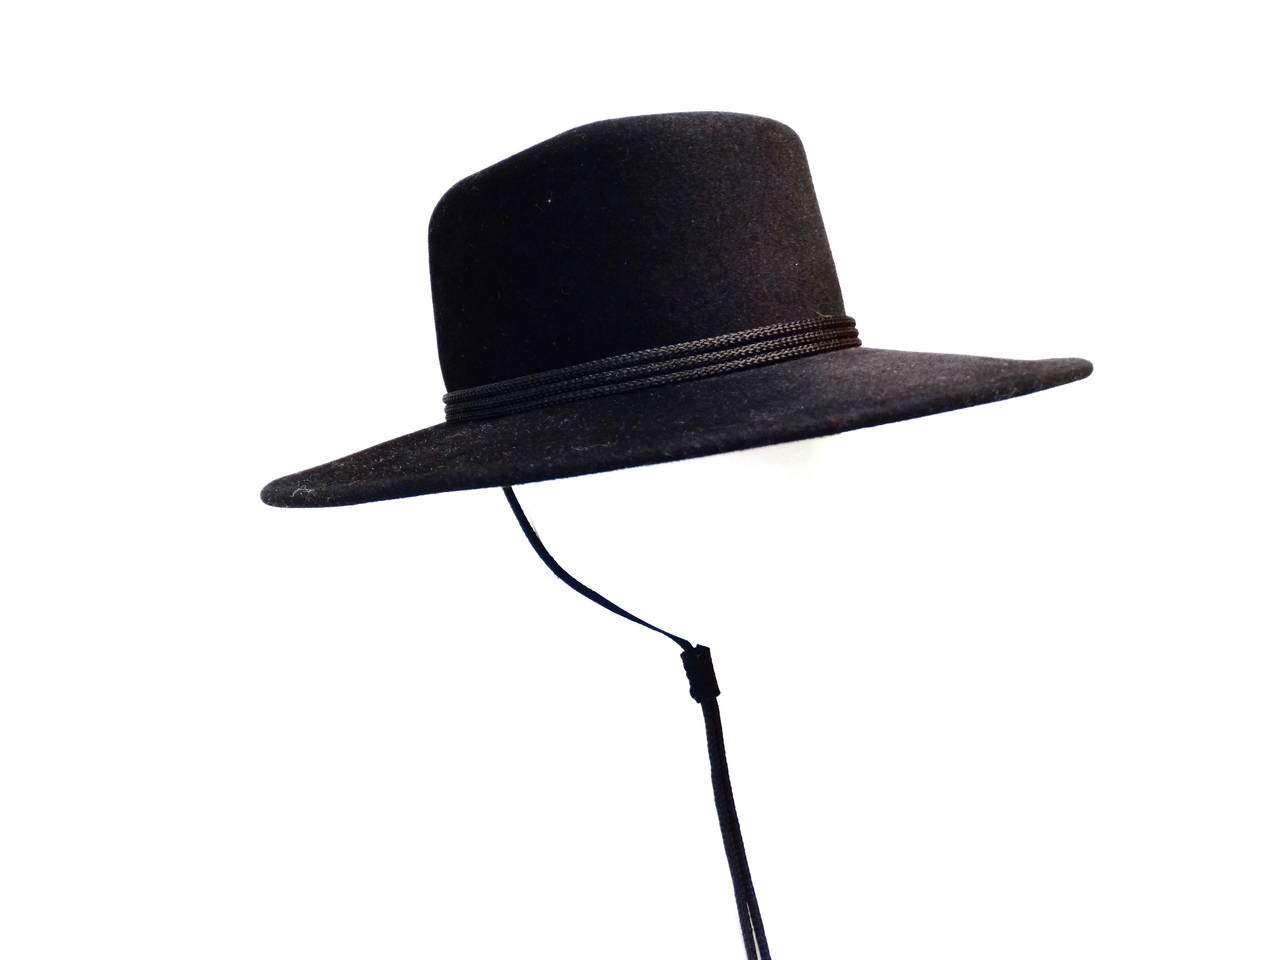 This wonderful 1980's hand-crafted Bolero Hat from Adolfo II for Saks Fifth Avenue is made of 100% wool and has spanish Sombrero Cordobe feel. The sombrero cordobés is a traditional hat made in the city of Córdoba, Spain. Made in the USA this is a